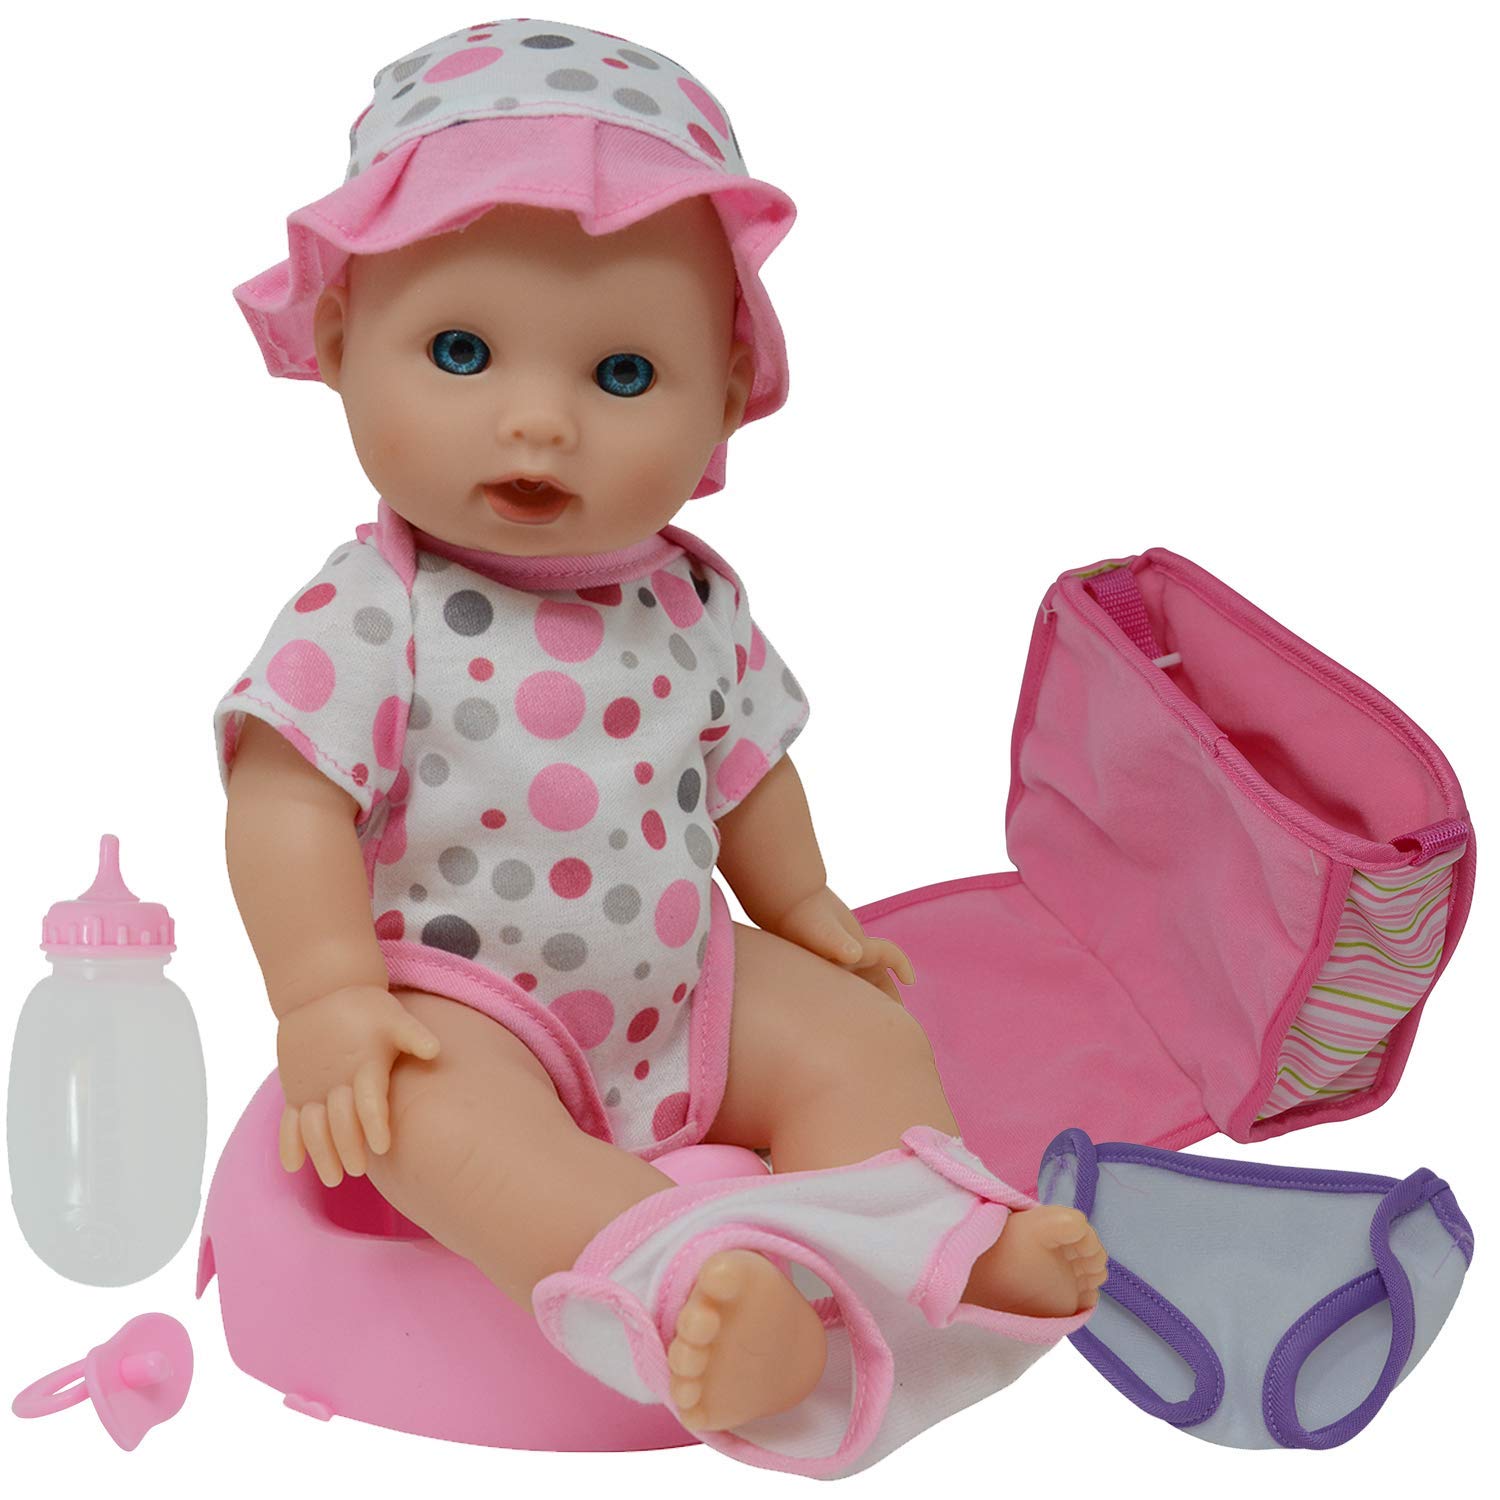 potty training baby alive dolls Potty training baby doll dolls alive pacifier drink wet bottle diapers posable sound female